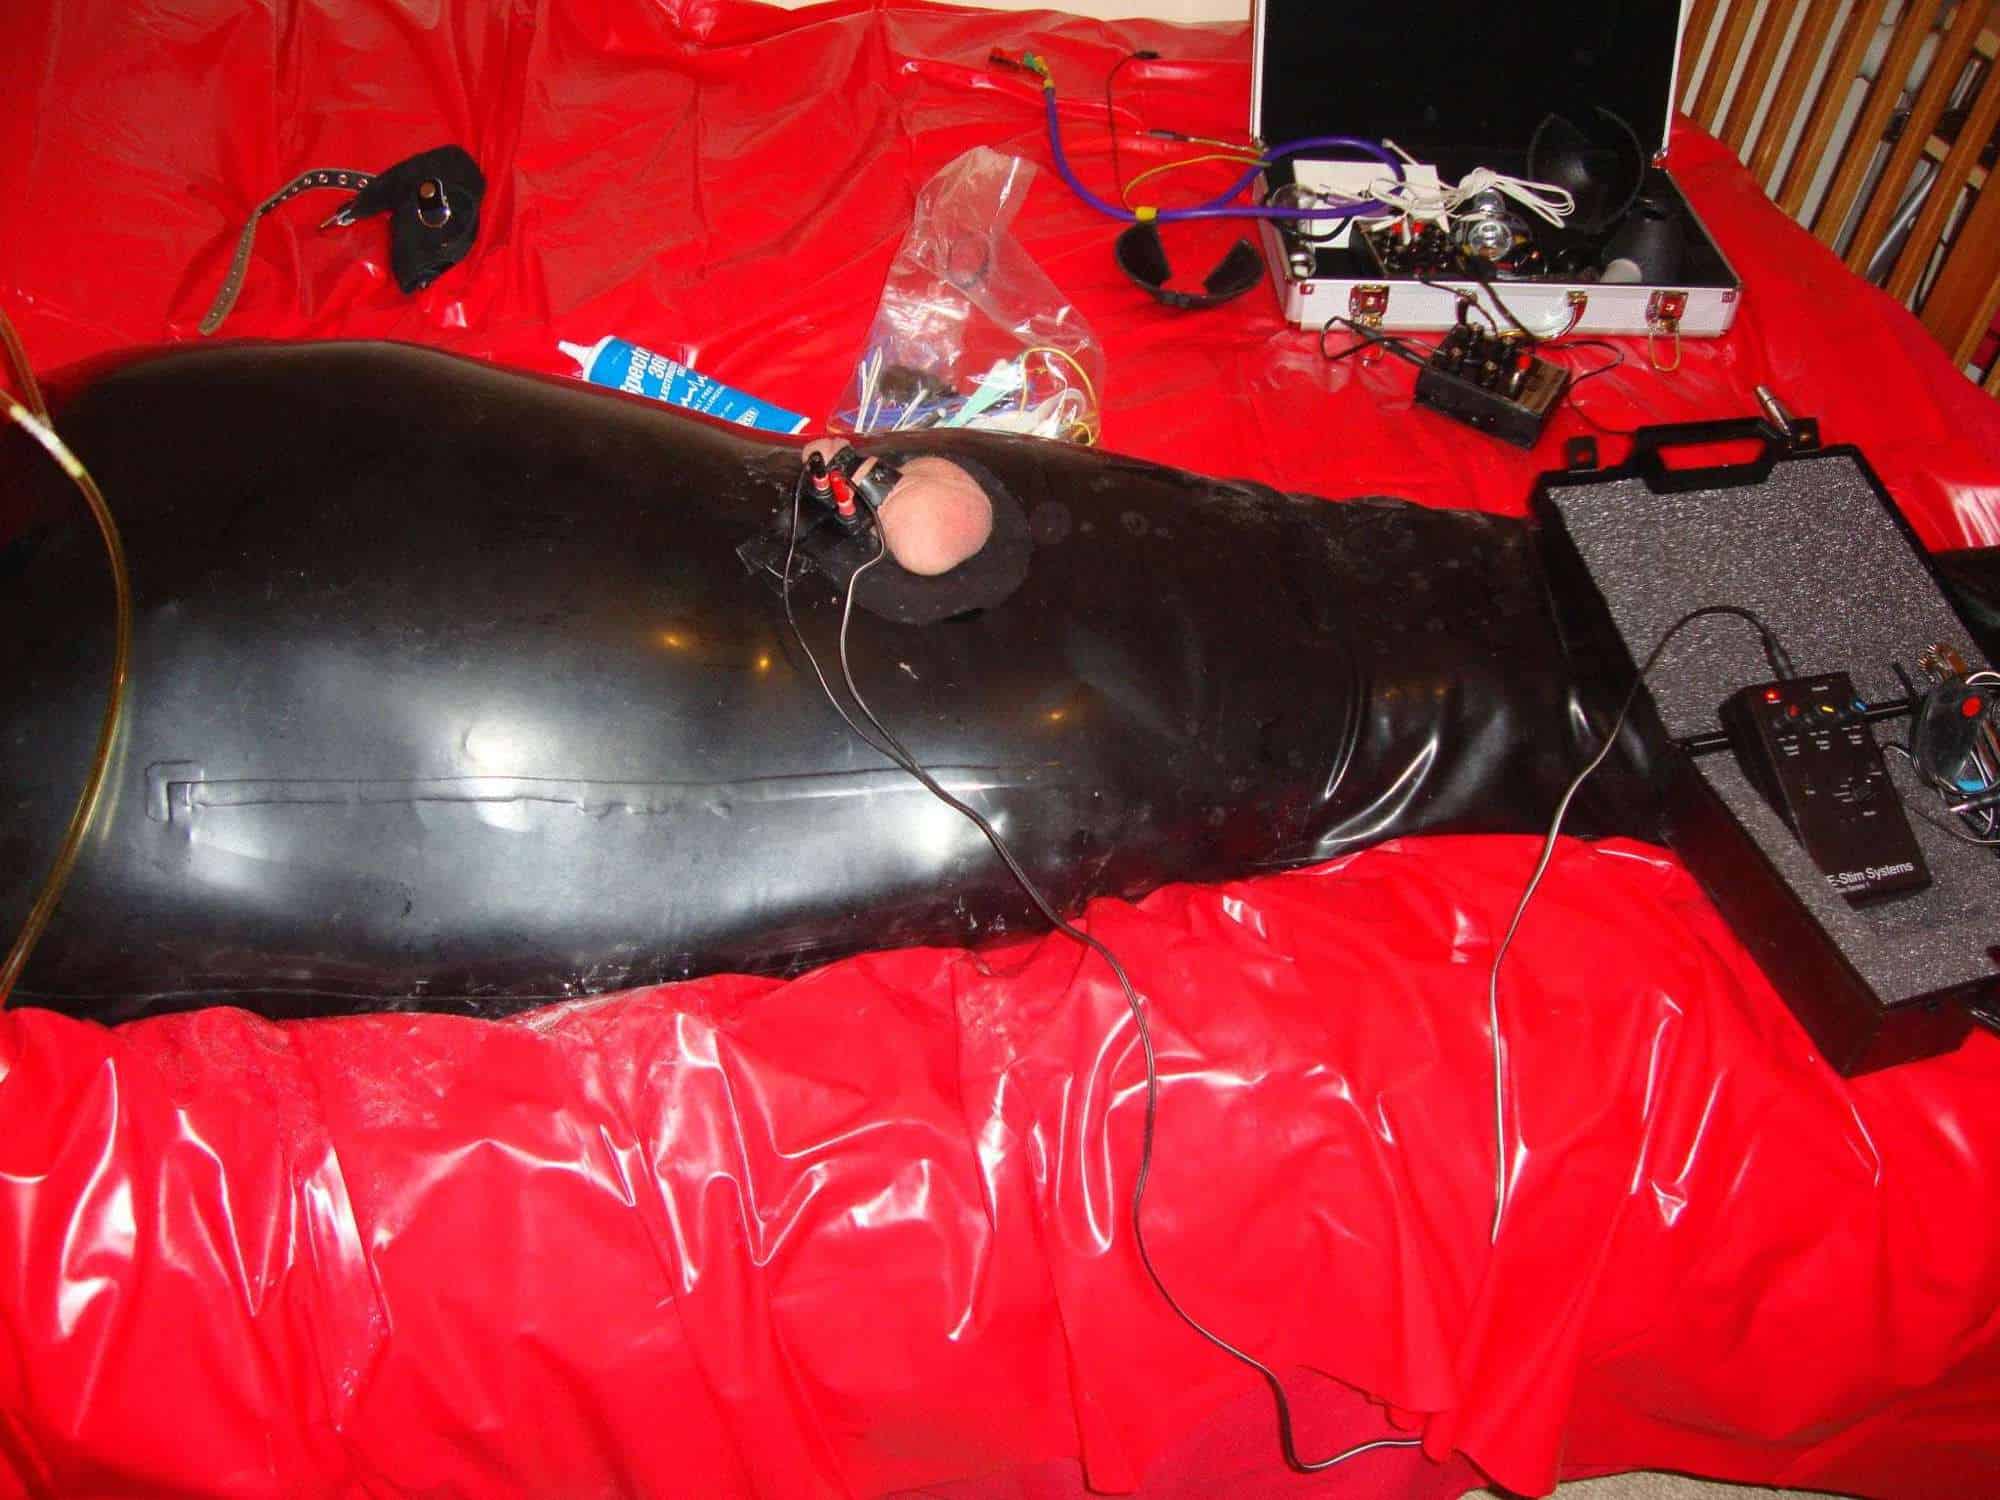 Hardcore cock and ball torture using electro devices